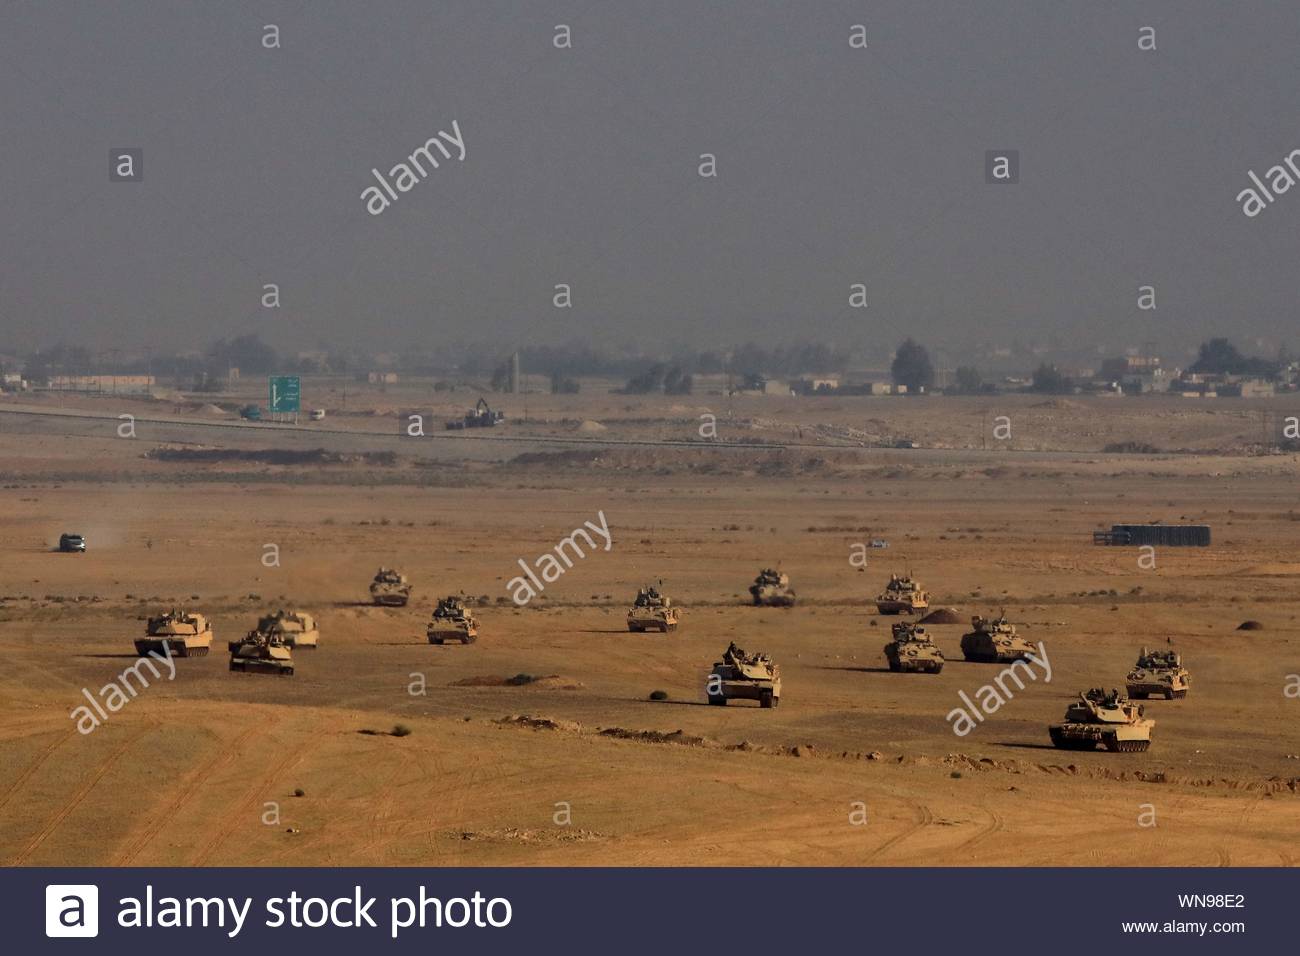 zarqa-jordan-5th-sep-2019-vehicles-from-different-countries-take-part-in-the-eager-lion-2019-military-exercise-near-the-city-of-zarqa-east-jordan-sept-5-2019-more-than-8000-troops-from-30-countries-took-part-in-the-ninth-edition-of-the-us-jordan-military-exercise-eager-lion-in-the-eastern-desert-of-jordan-credit-mohammad-abu-ghoshxinhuaalamy-live-news-WN98E2.jpg